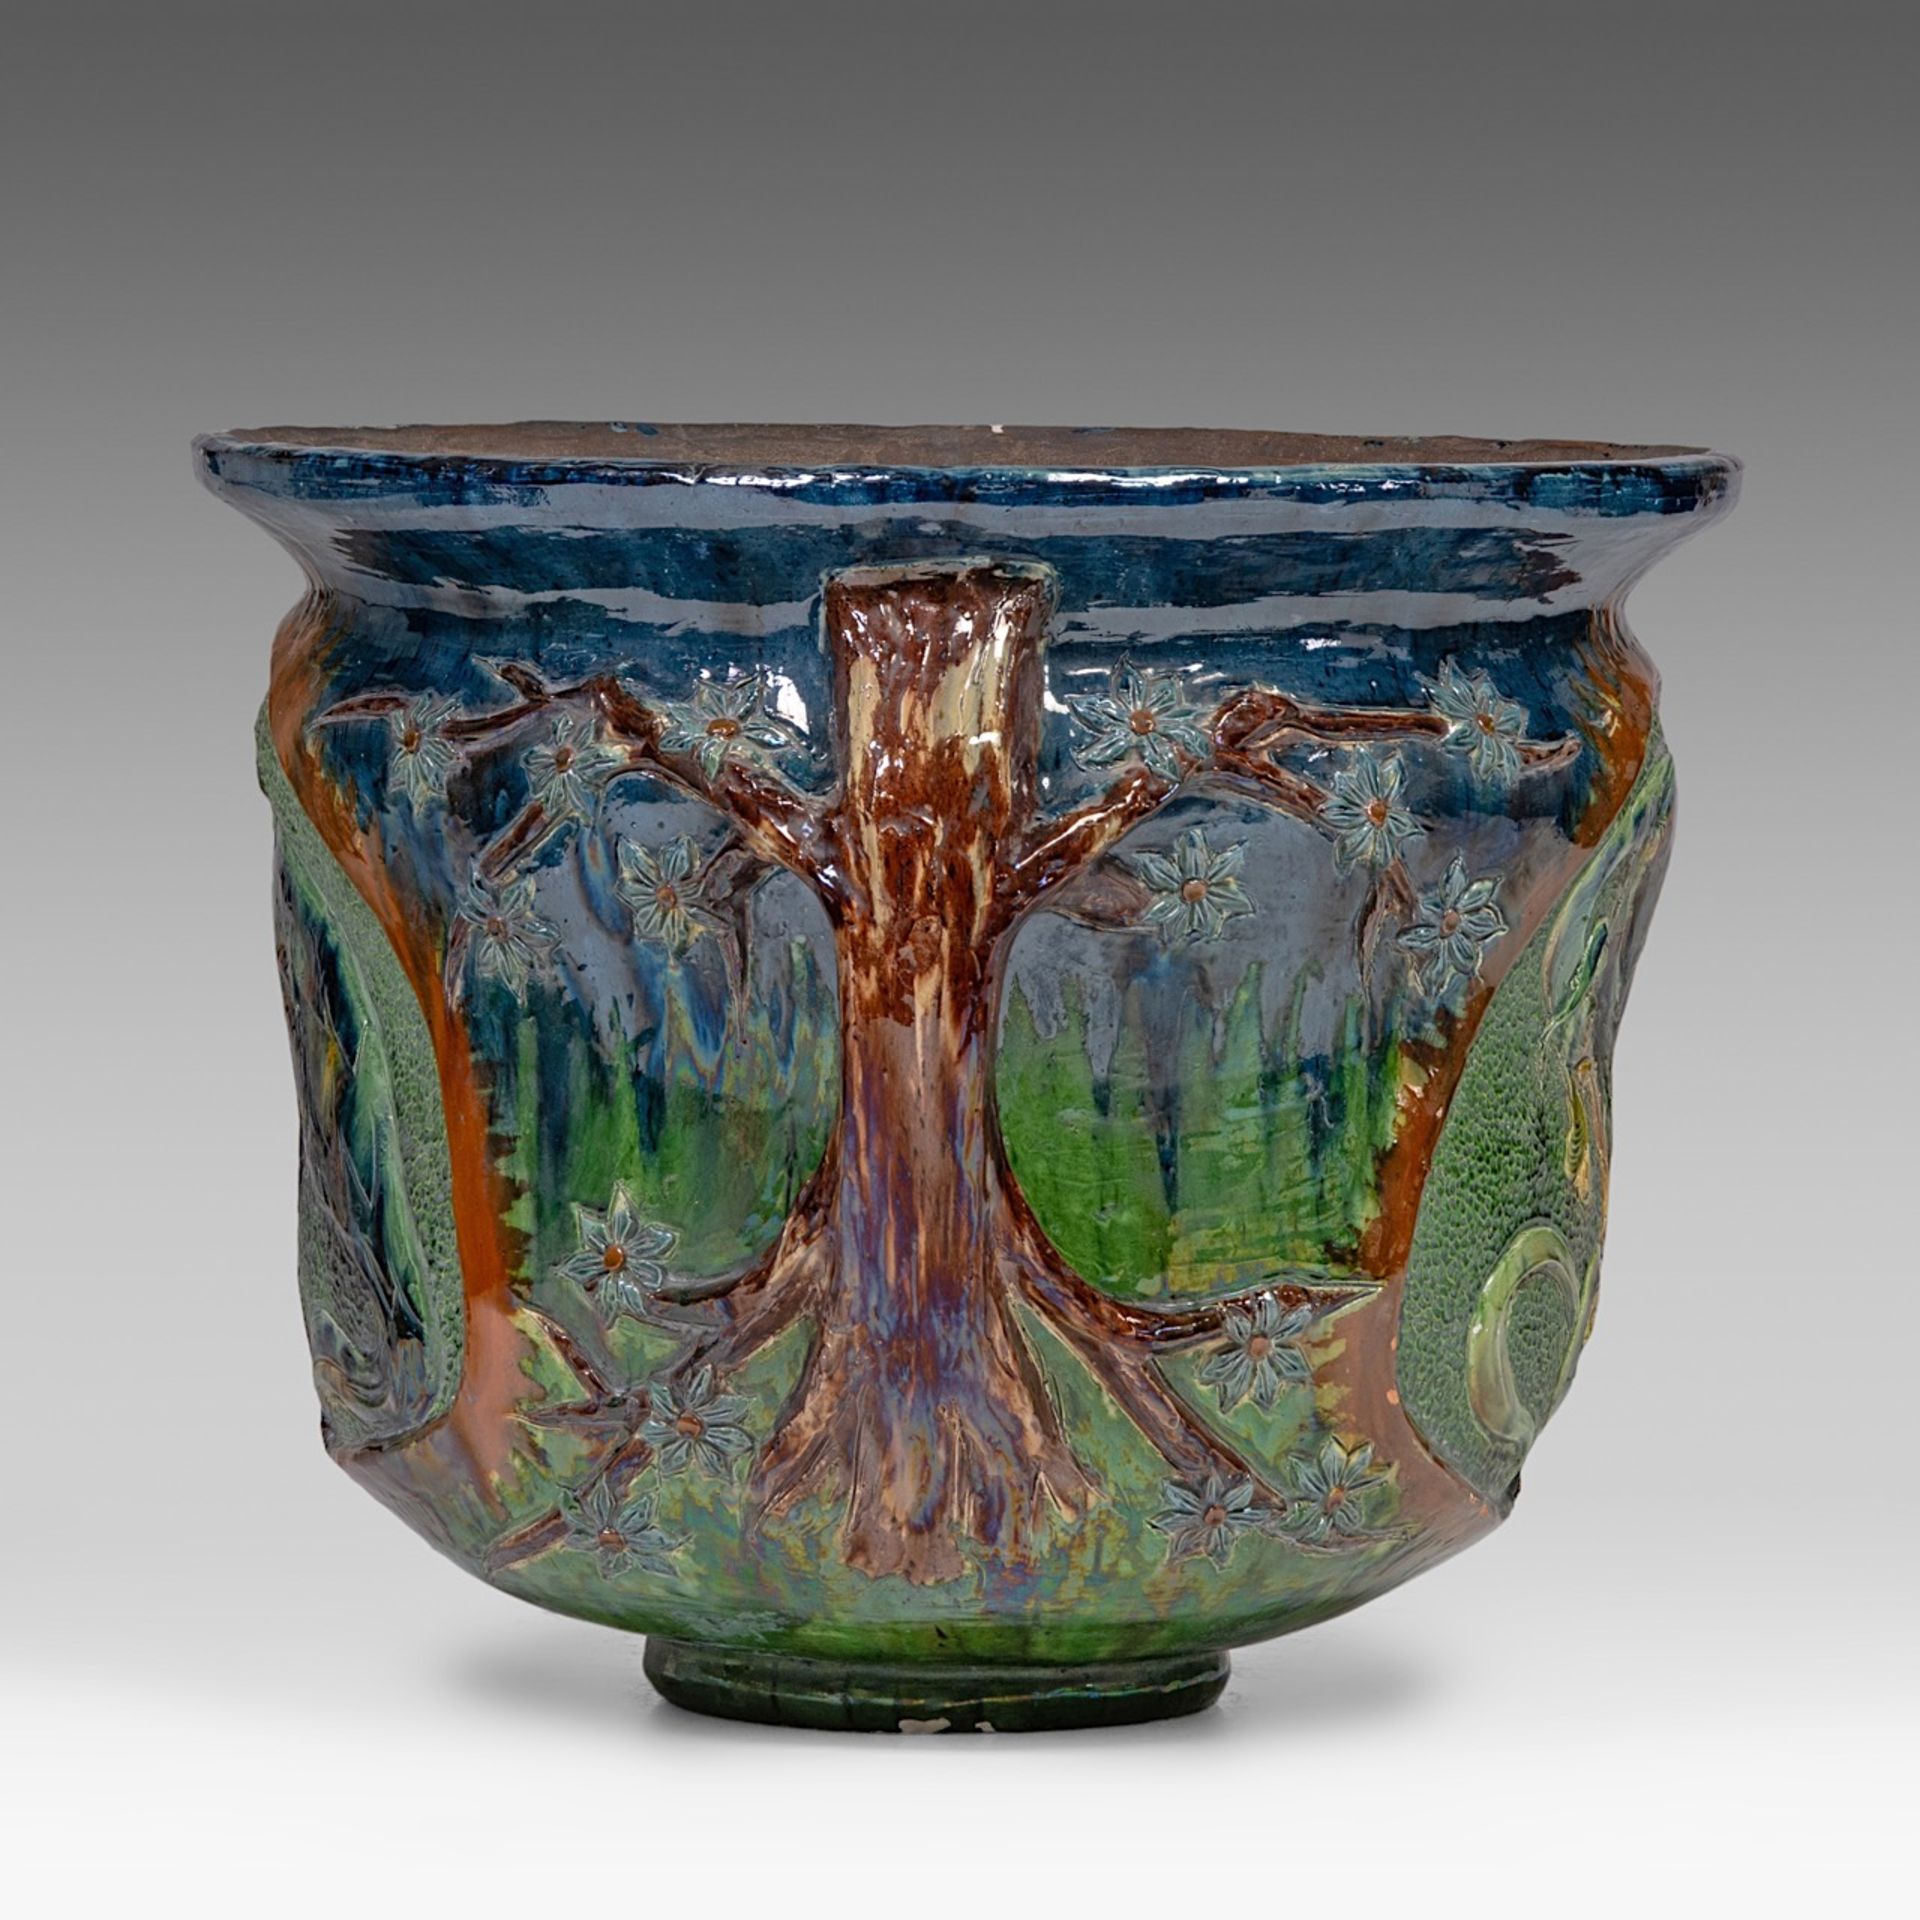 An imposing Art Nouveau polychrome earthenware cachepot on stand by the Caesens pottery manufactory, - Image 10 of 19